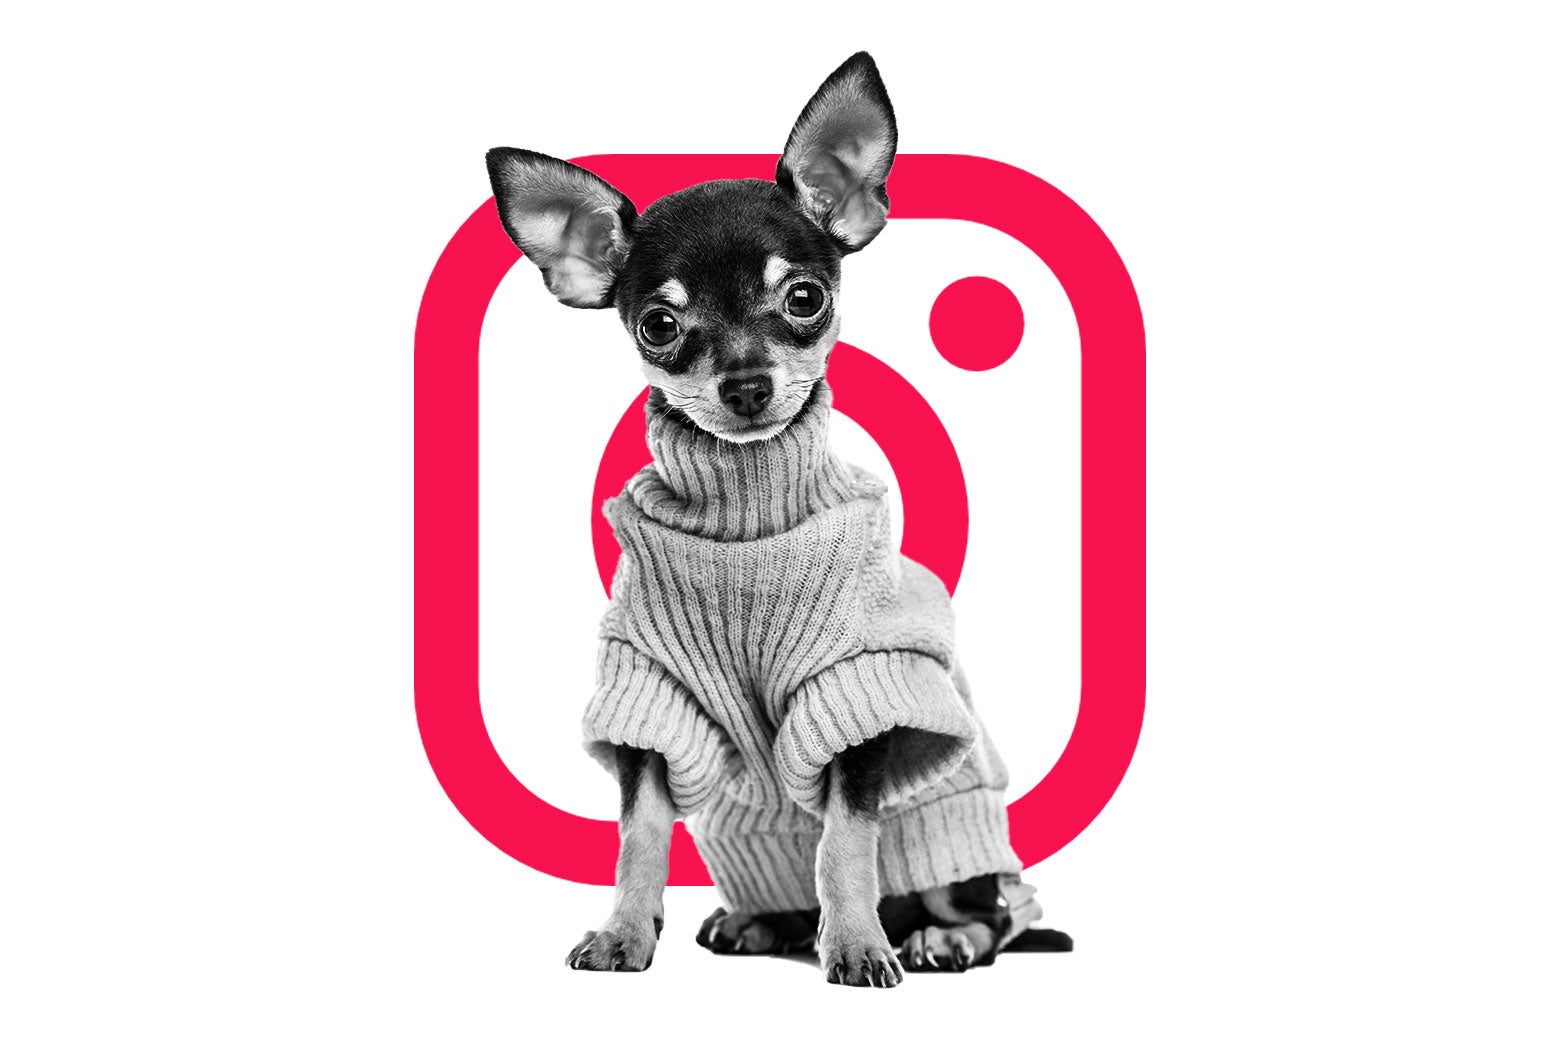 A cute puppy in front of the instagram logo